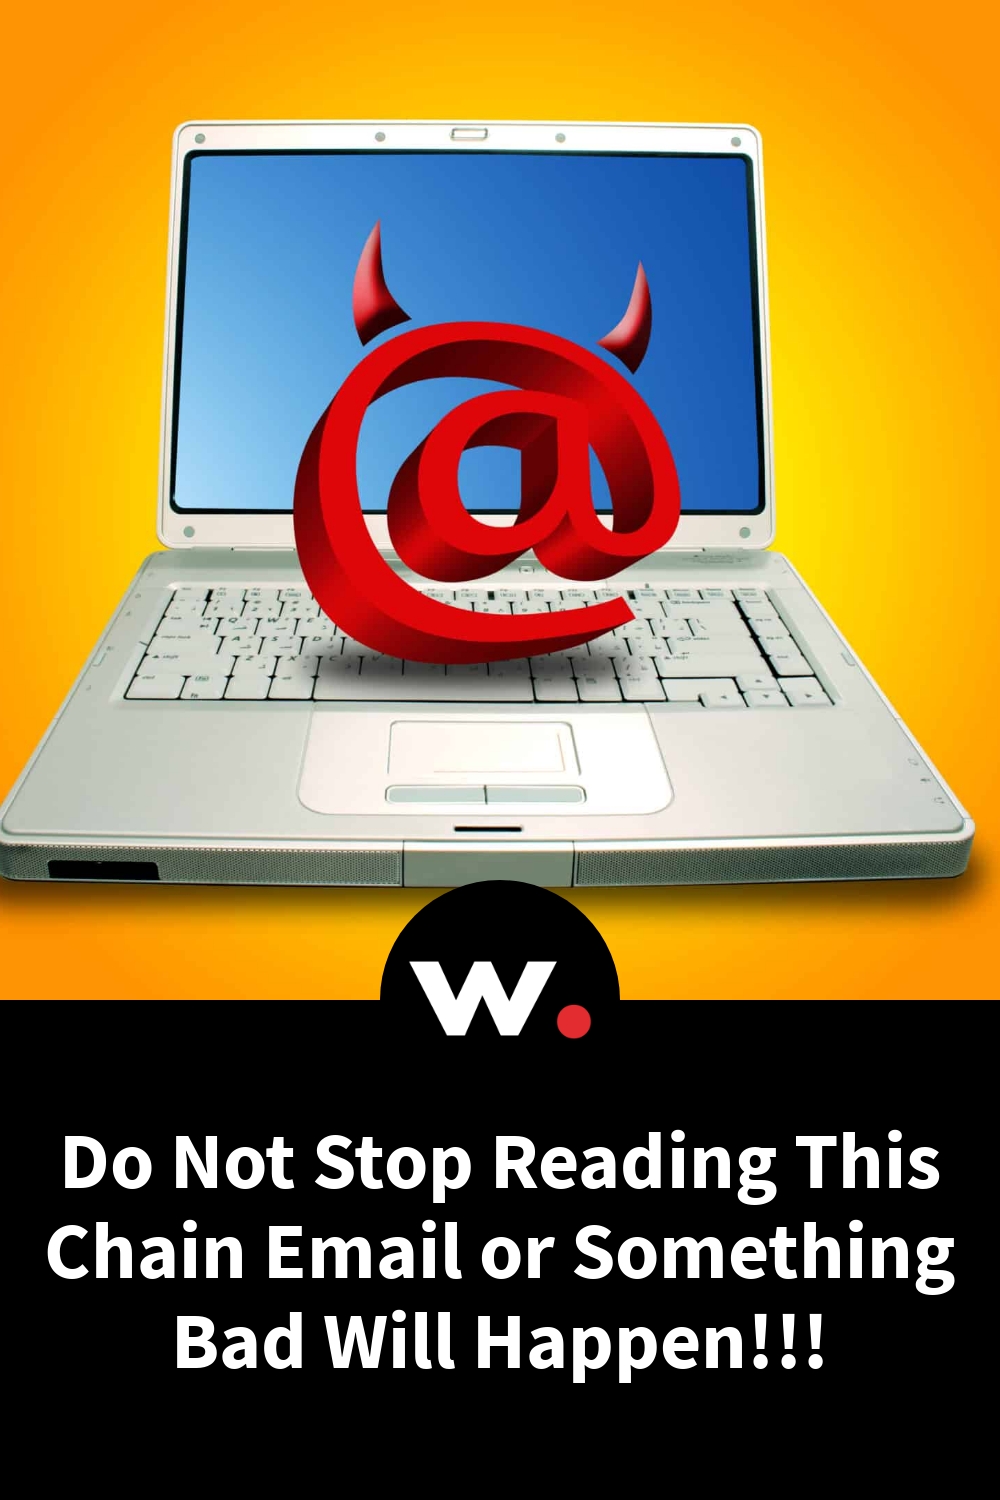 Do Not Stop Reading This Chain Email or Something Bad Will Happen!!!